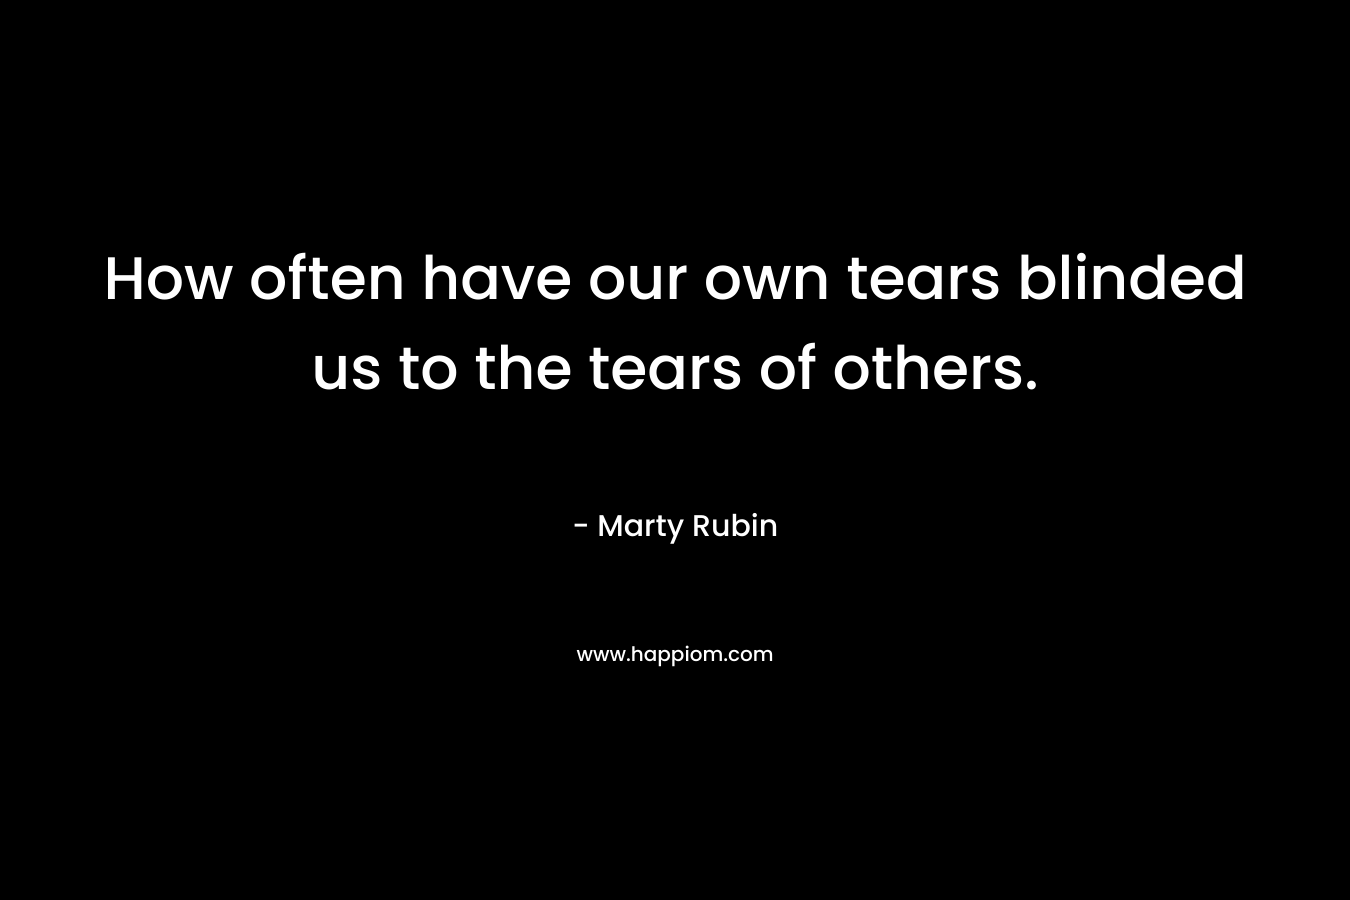 How often have our own tears blinded us to the tears of others.